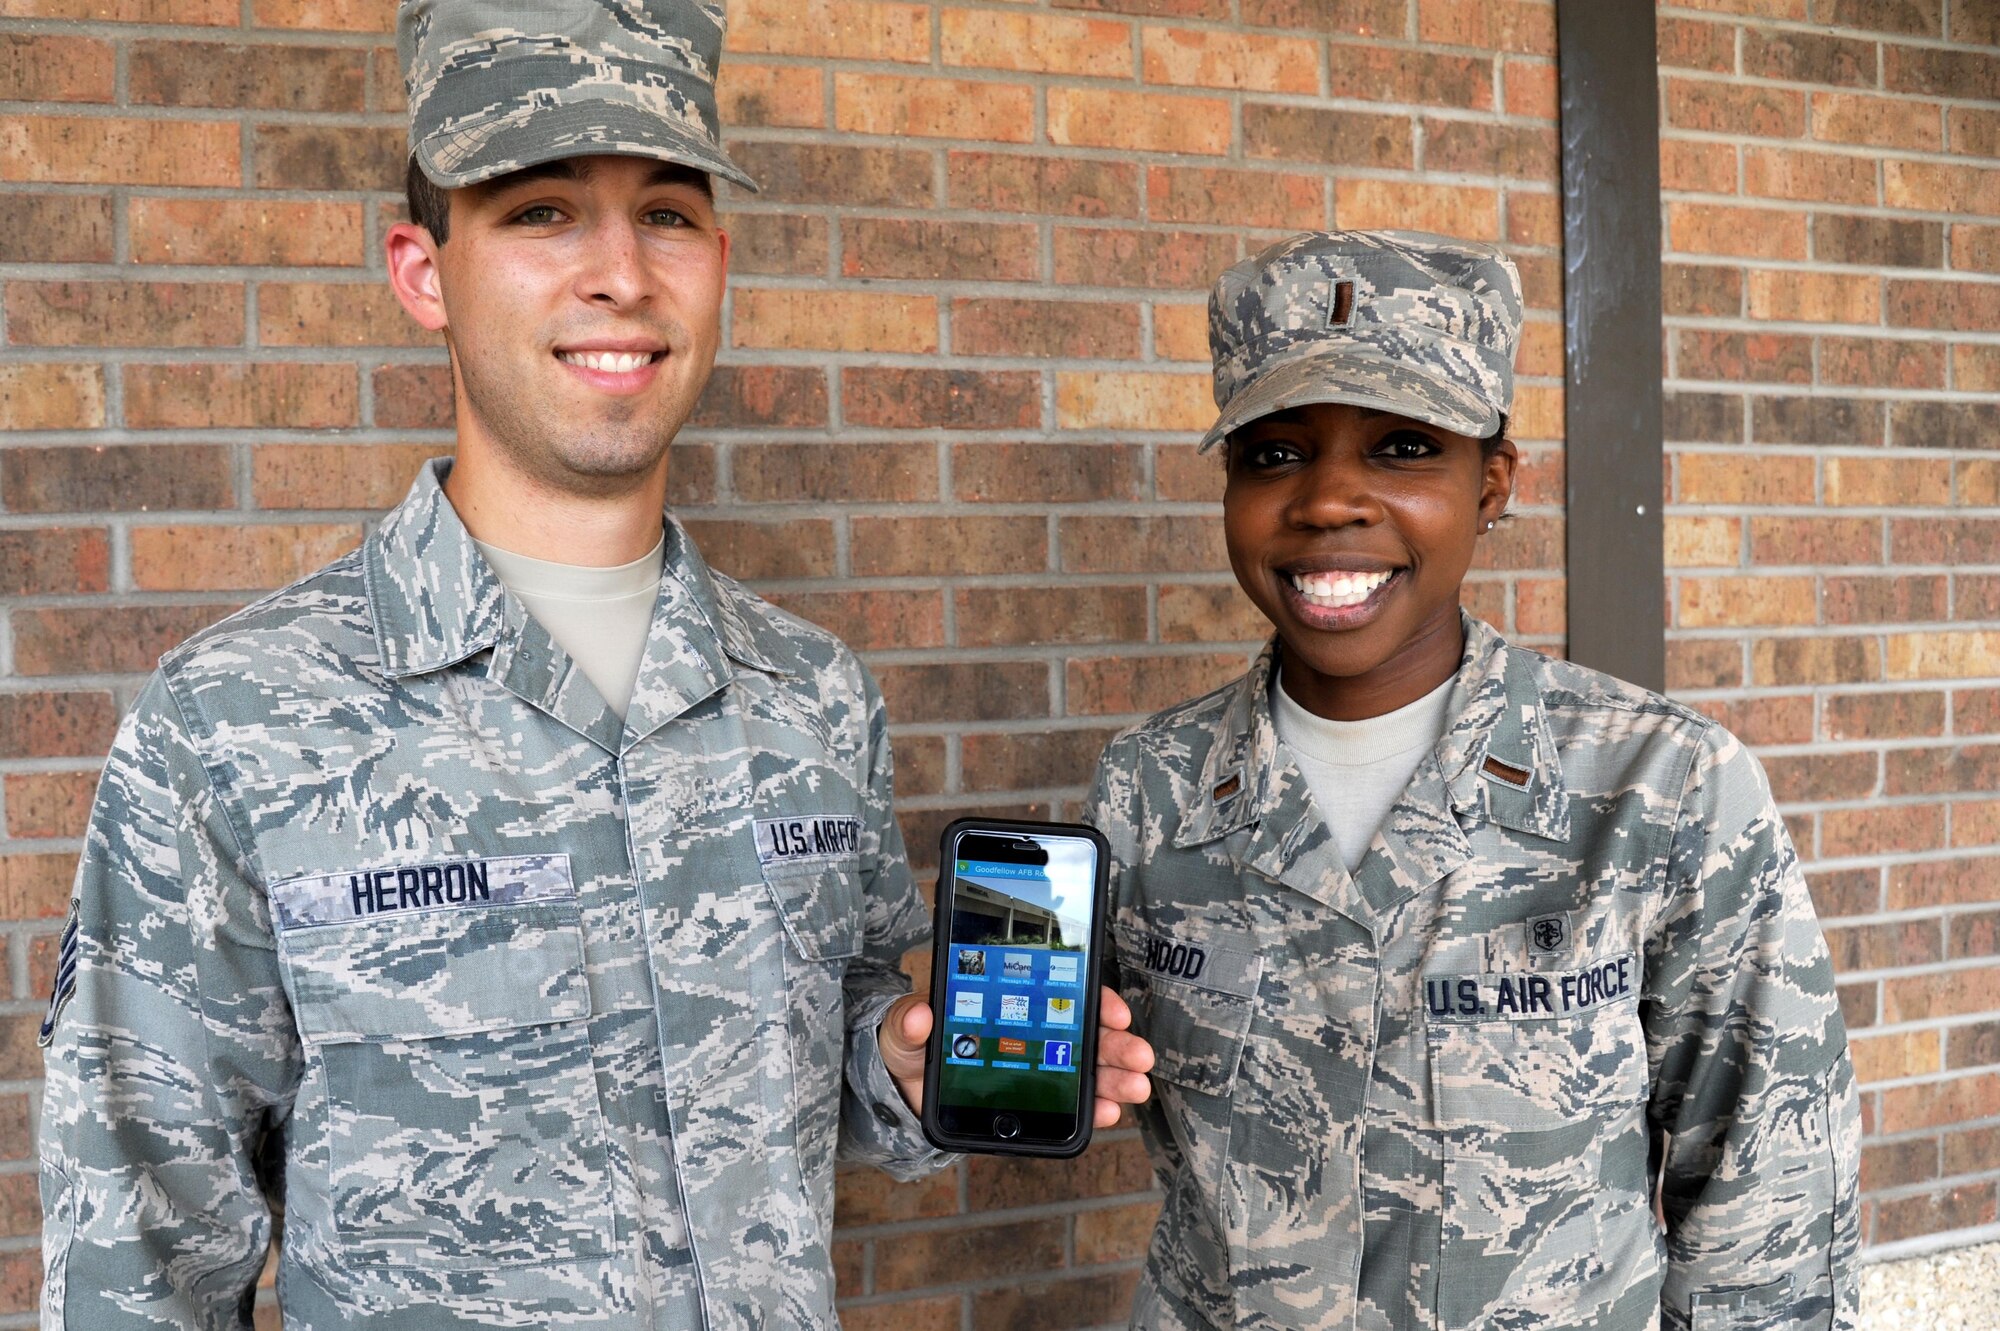 U.S. Air Force Staff Sgt. Charles Herron, 17th Medical Support Squadron command support staff NCO in charge, and 2nd Lt. Mara Hood, 17th MDSS group practice manager, pose for a photo with the new 17th Medical Group app outside the Ross Clinic on Goodfellow Air Force Base, Texas, June 24, 2016. The app is set to release in July on a variety of platforms and assist individuals with their healthcare information needs.